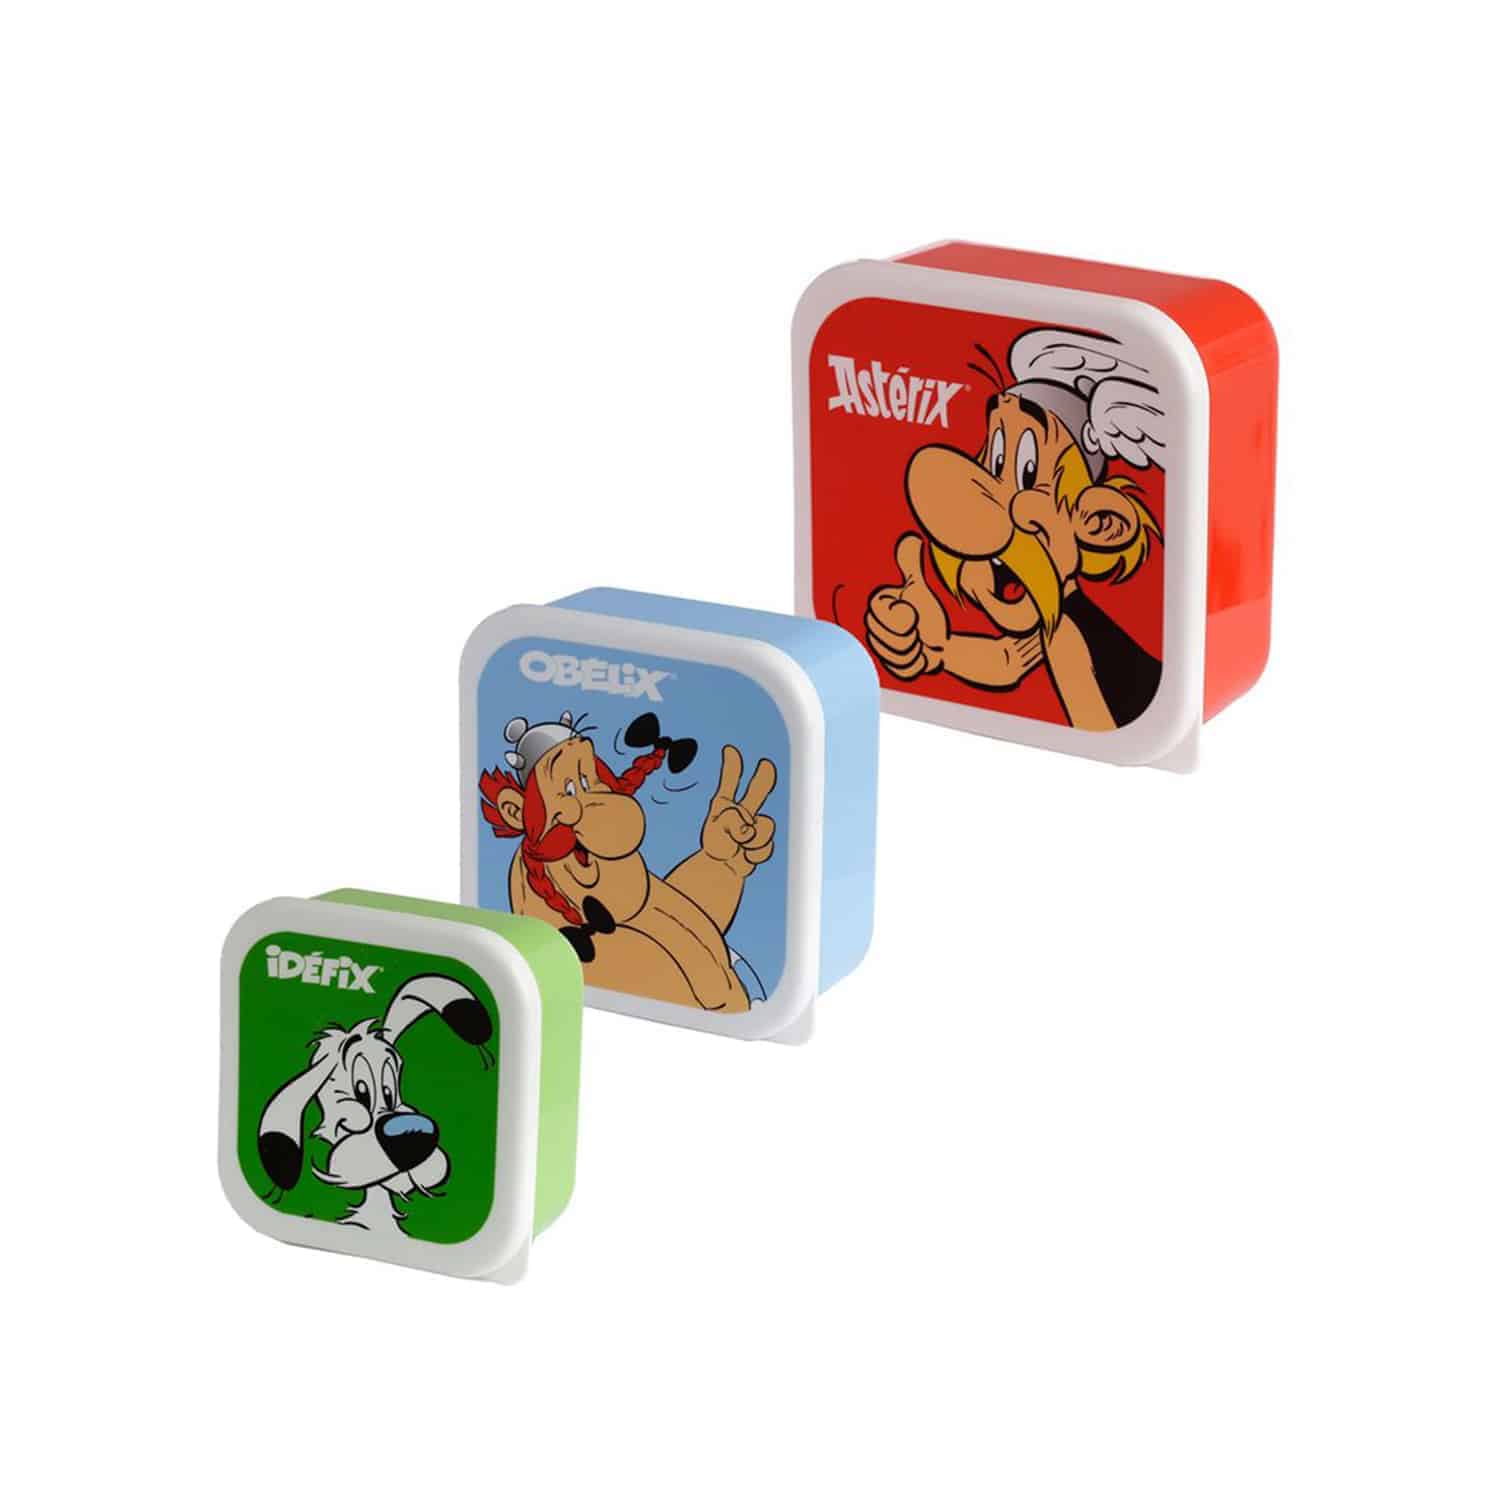 asterix-lunchbox-set-of-3